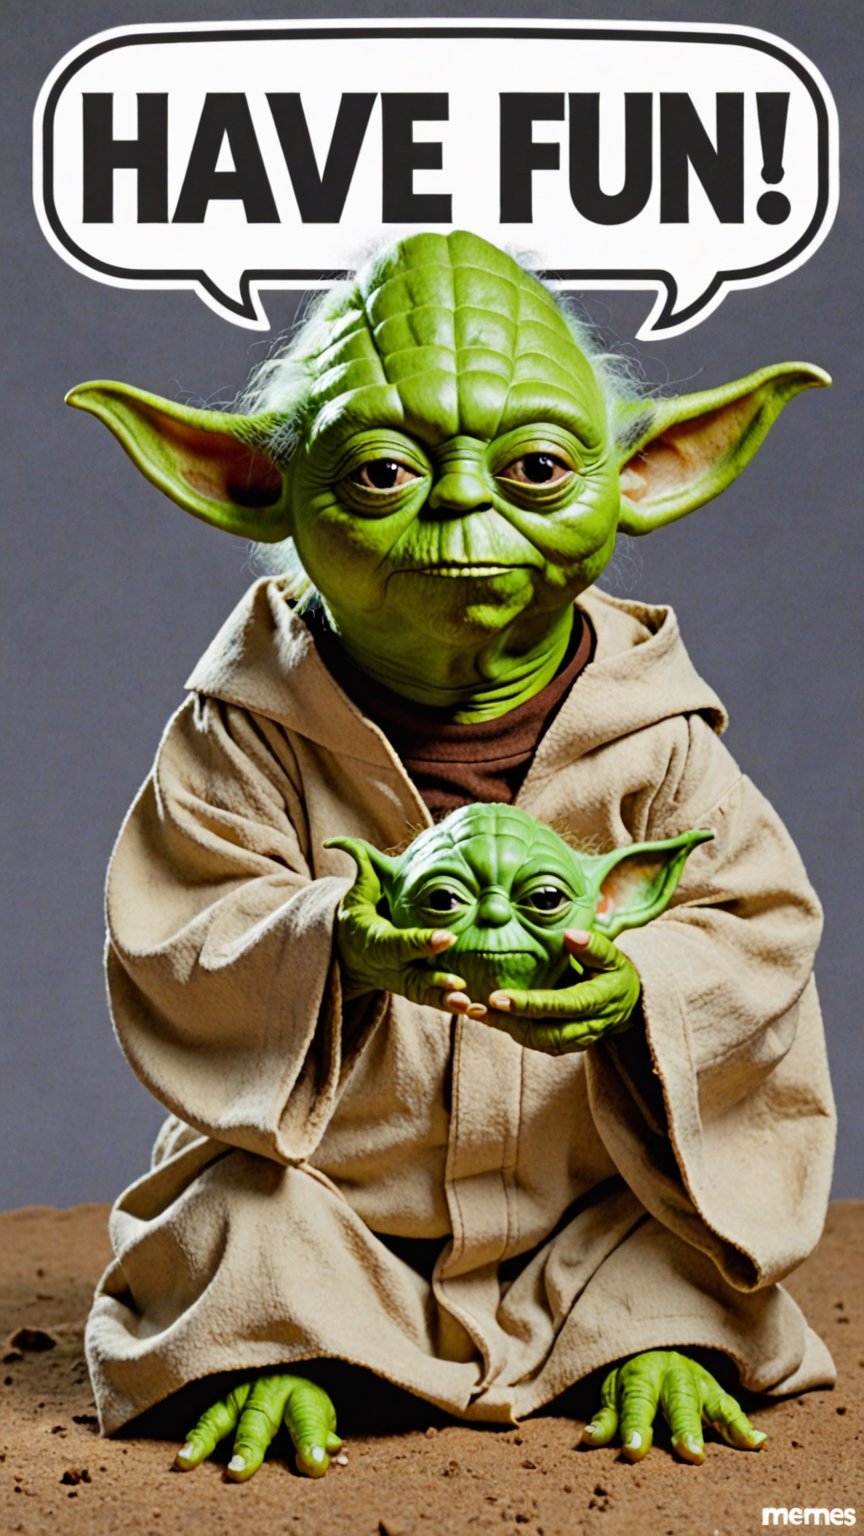 Photo of Yoda with text bubble that says "have fun with memes xl" 